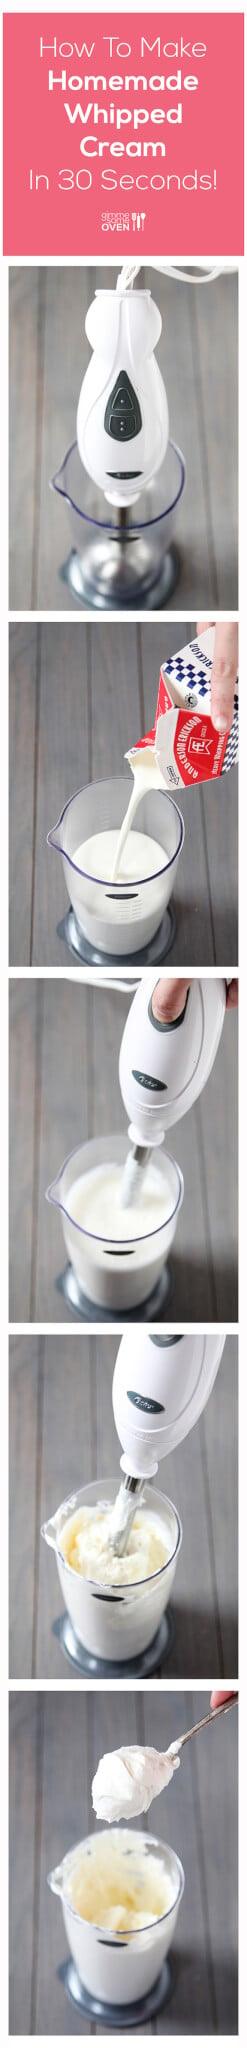 How to Make Whipped Cream with an Immersion Blender 